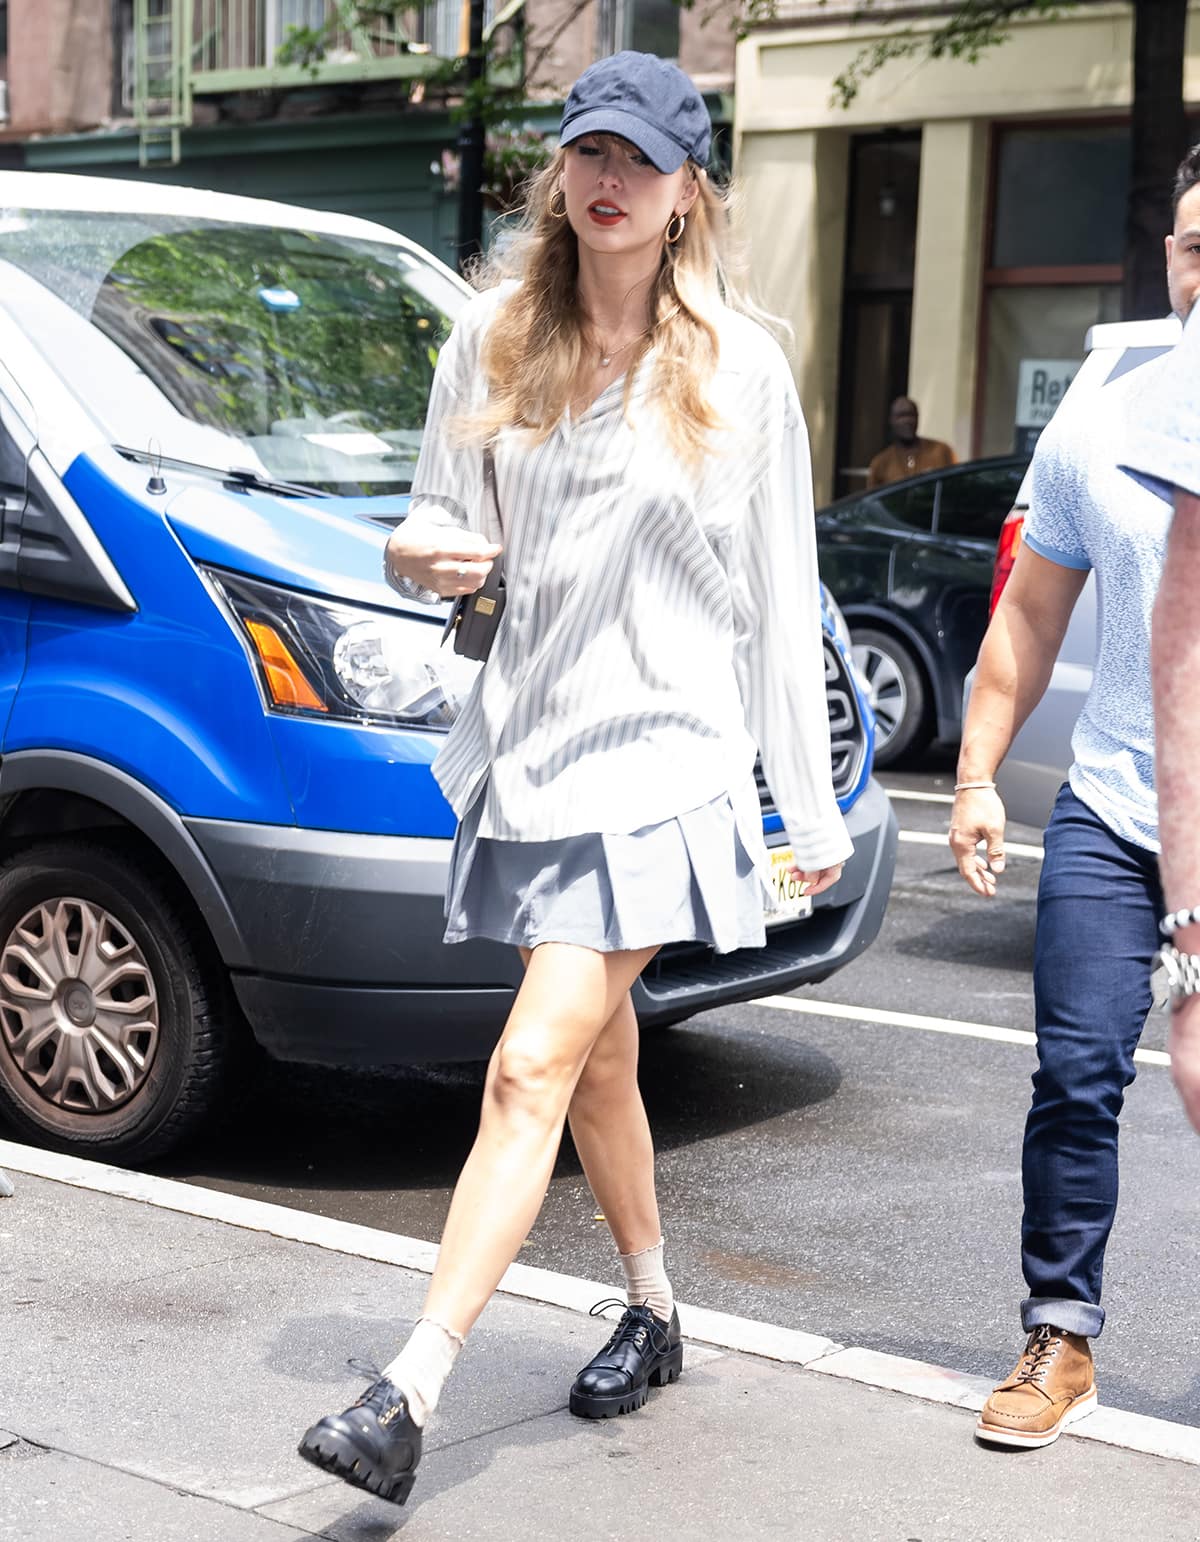 Taylor Swift is summer chic in a striped shirt by The Row, pleated skort by Free People, and chunky black shoes by Malone Souliers